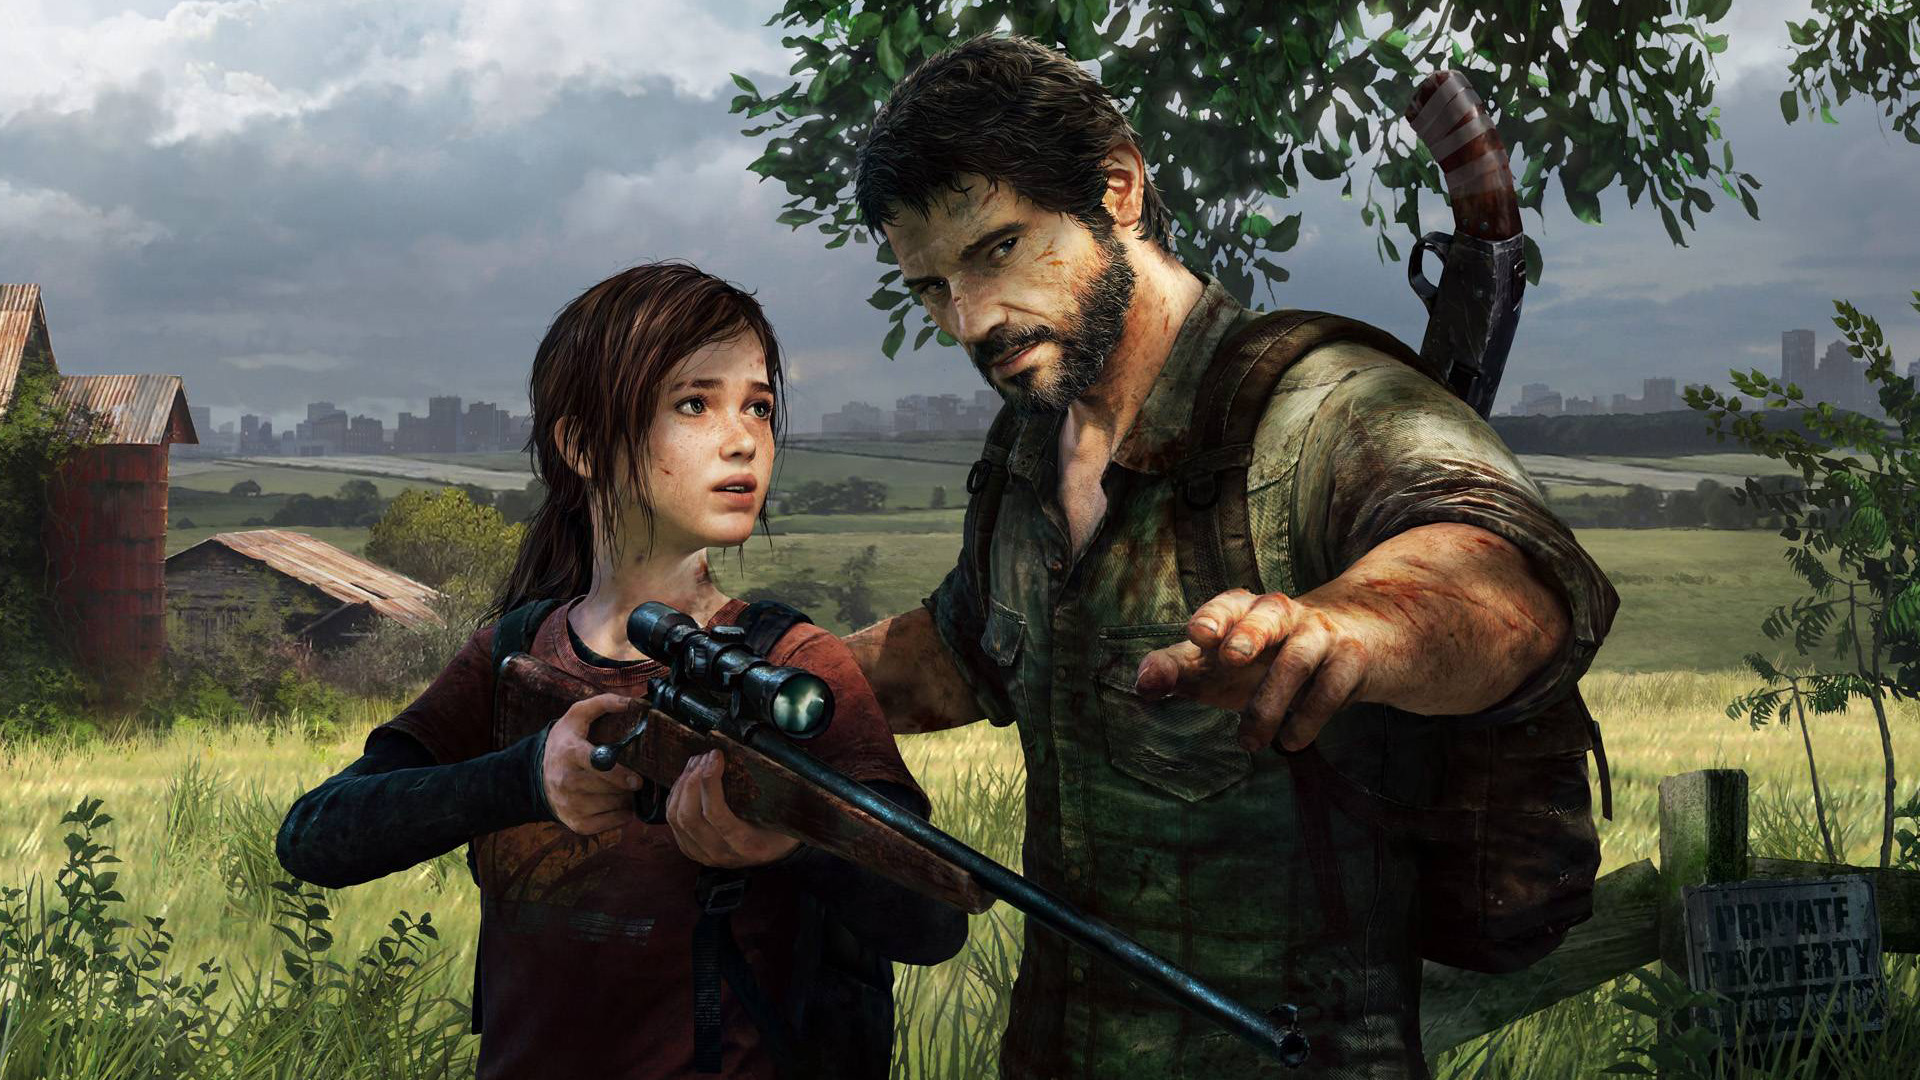 Joel teaches Ellie to use a sniper rifle in Last of Us.